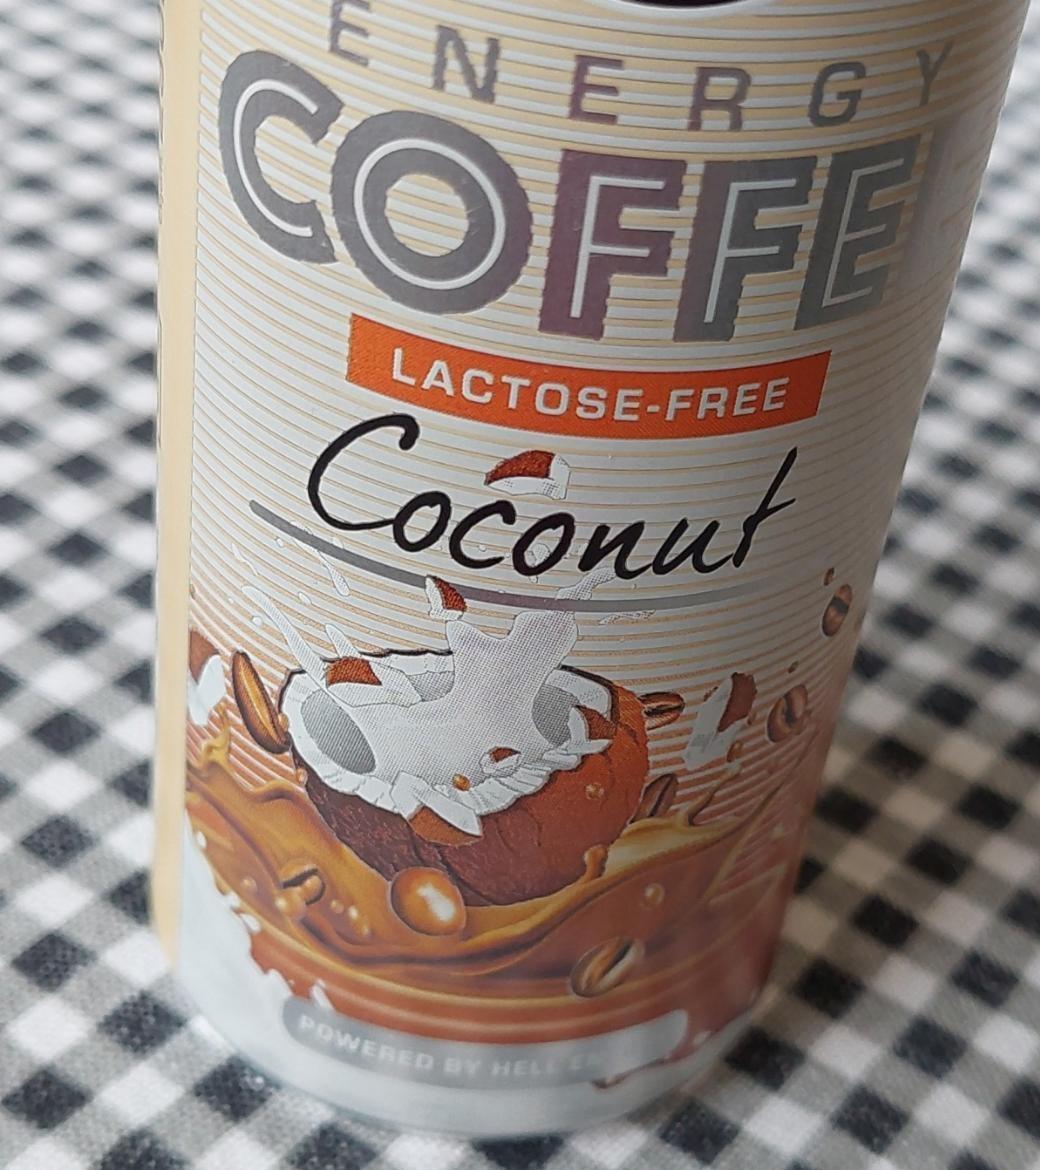 Fotografie - Energy Coffee Coconut Lactose-Free Hell